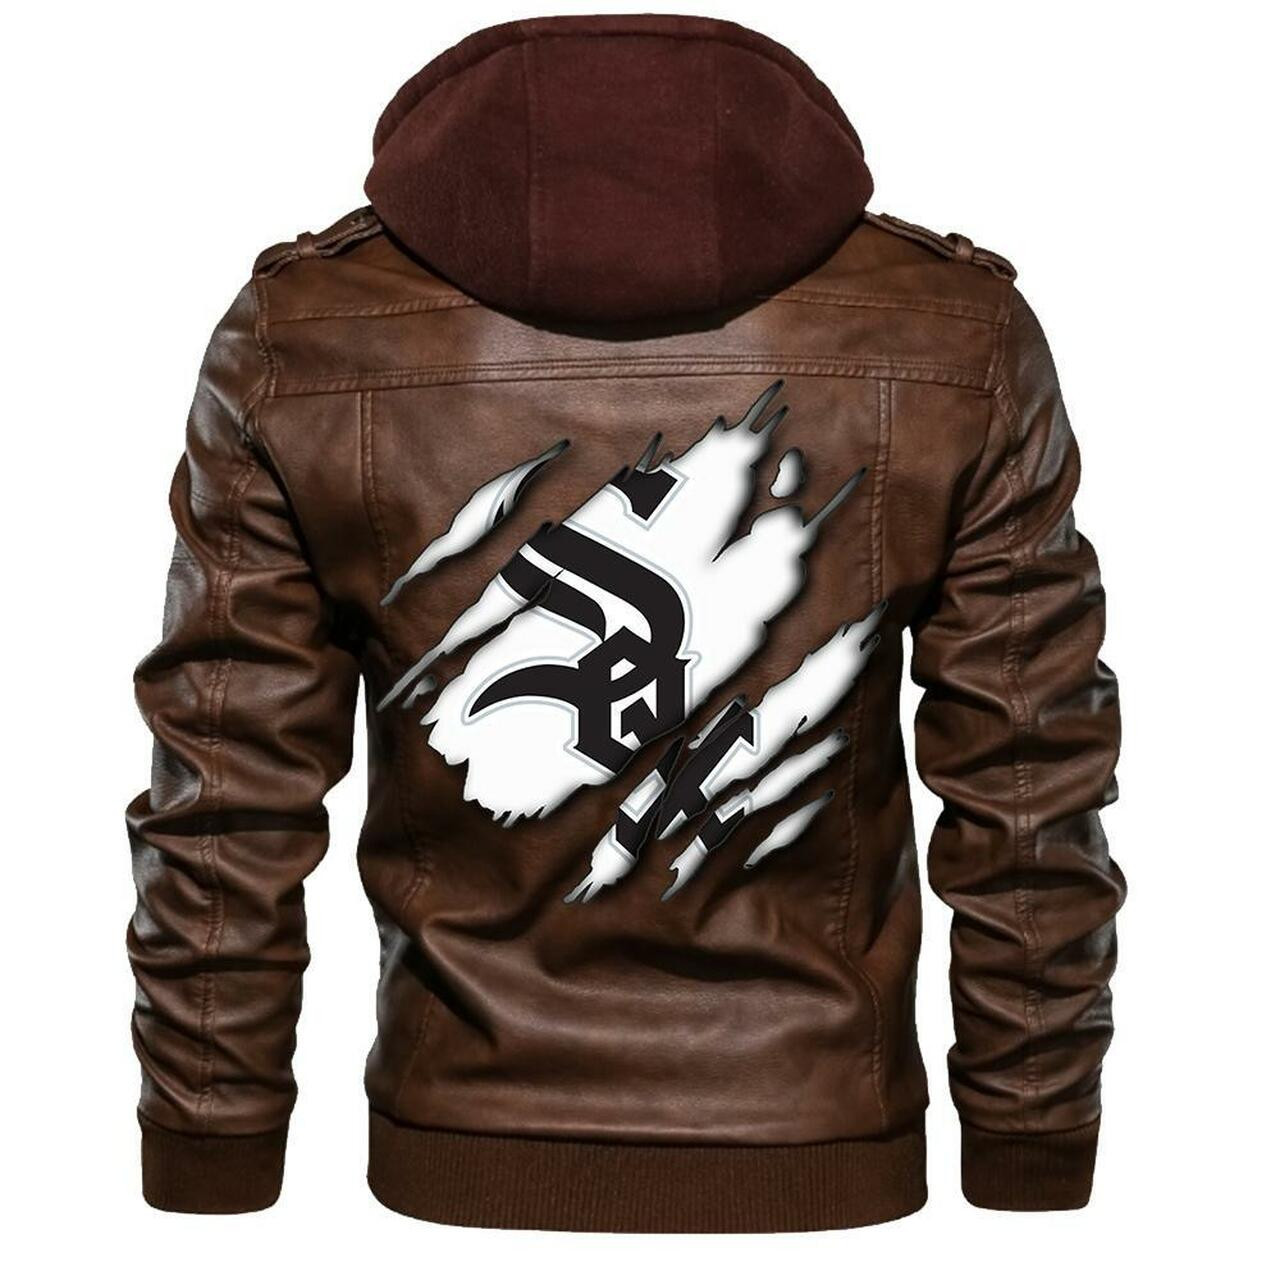 Check out and find the right leather jacket below 198